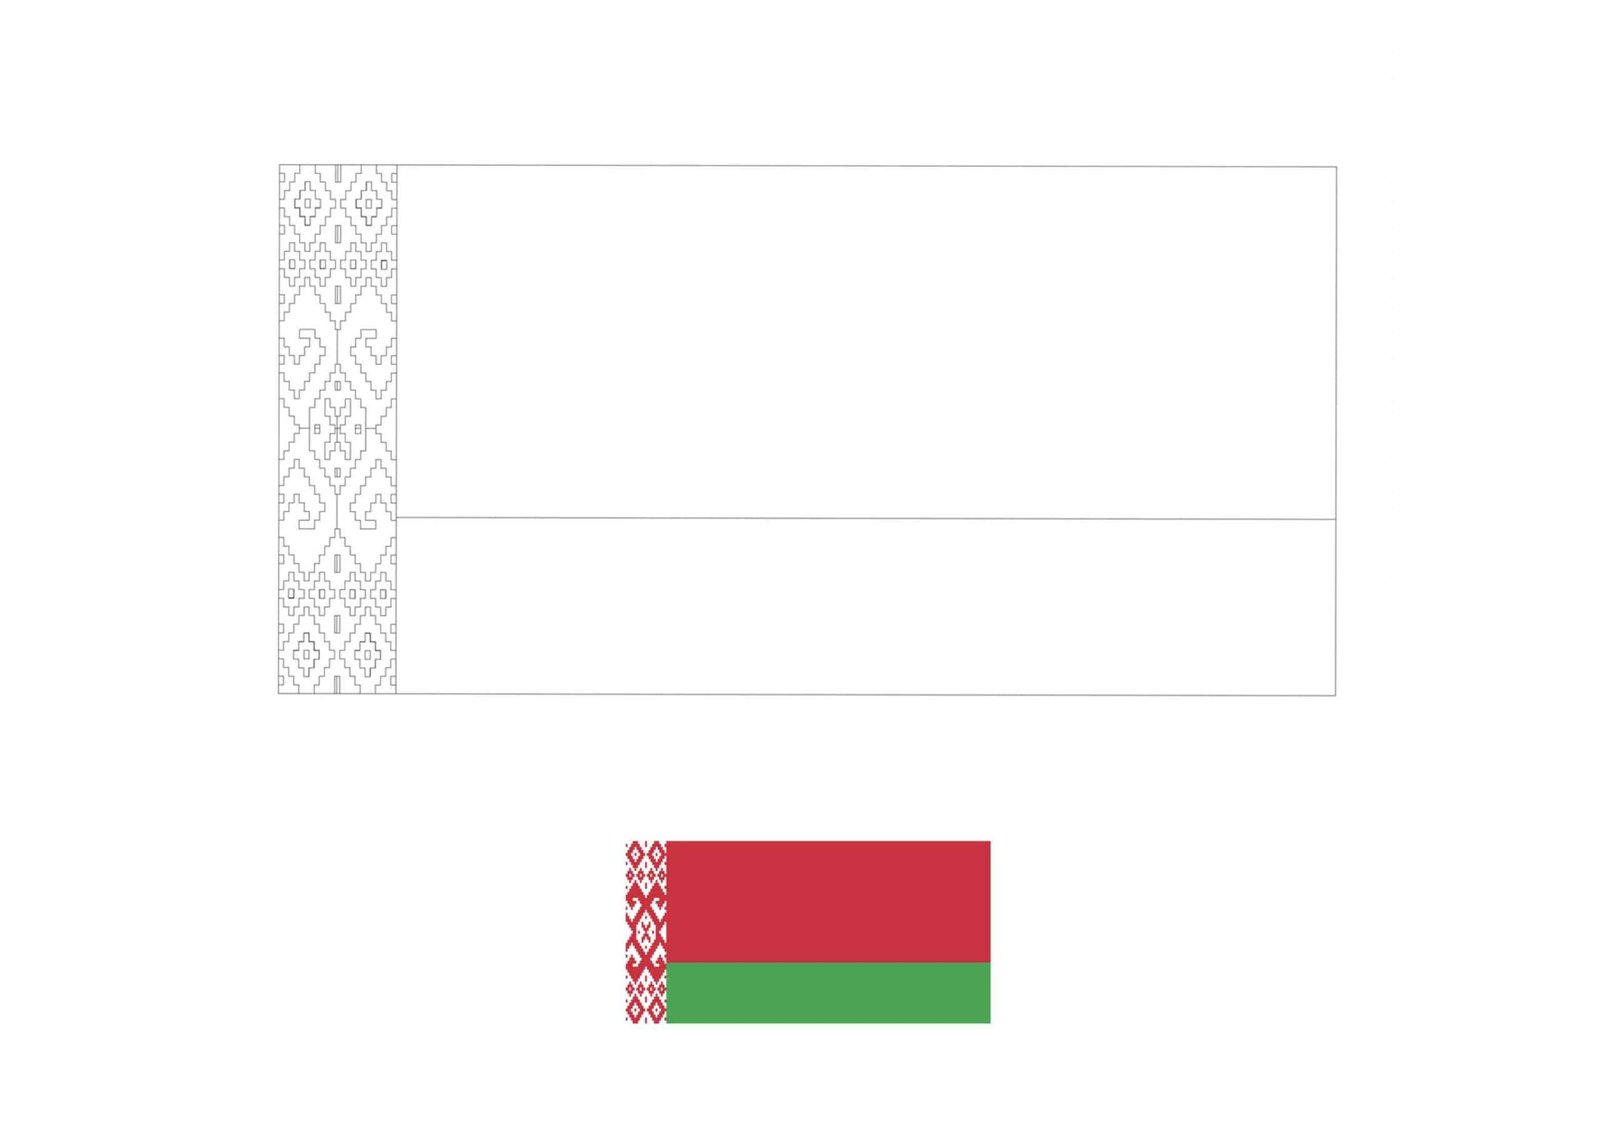 Belarus flag coloring page with a sample